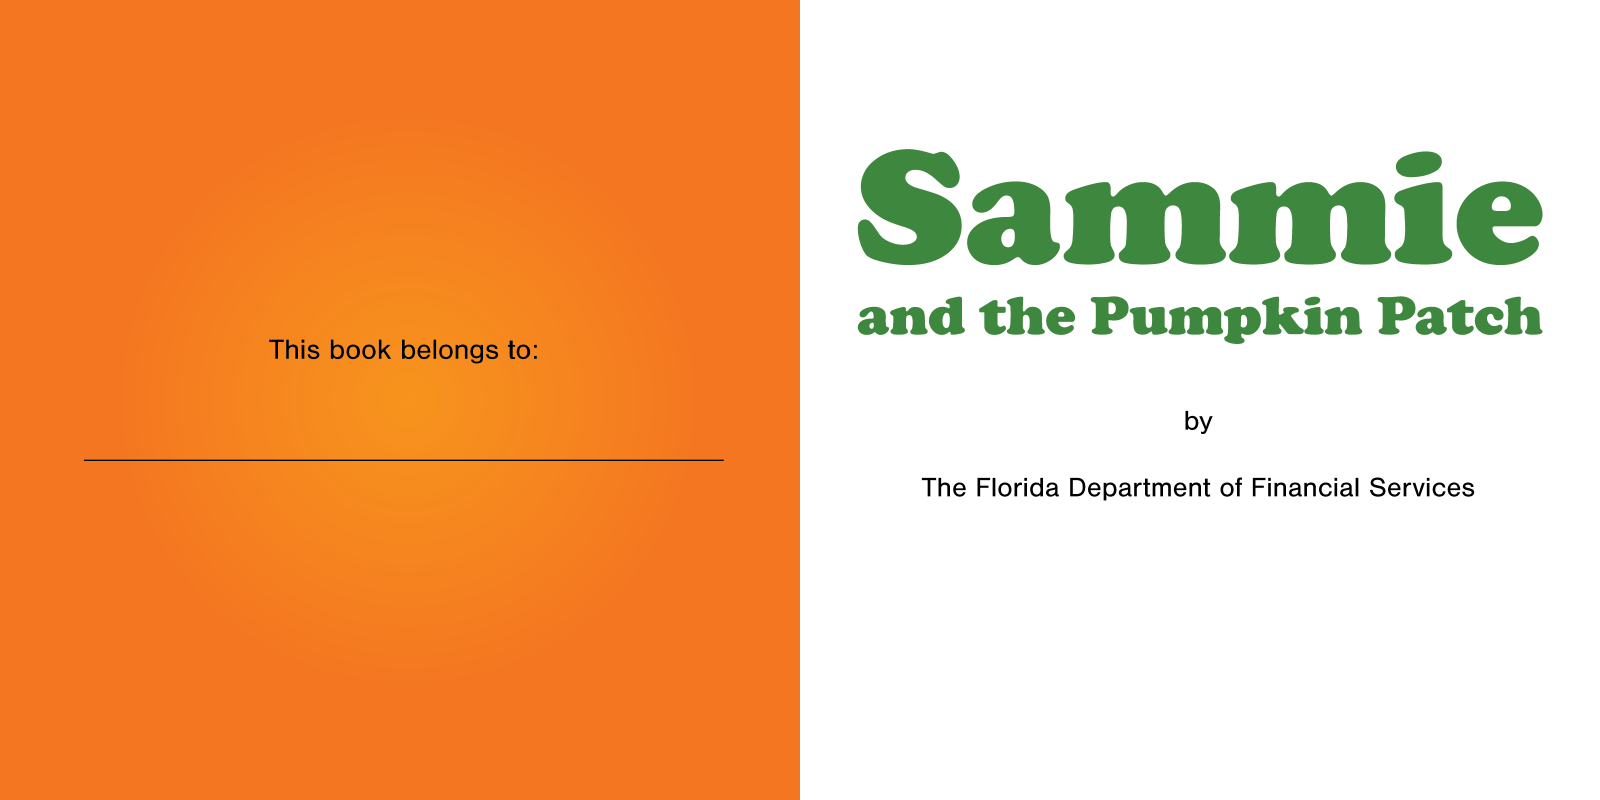 Slide 2 of the Sammie and the Pumpkin Patch E-book